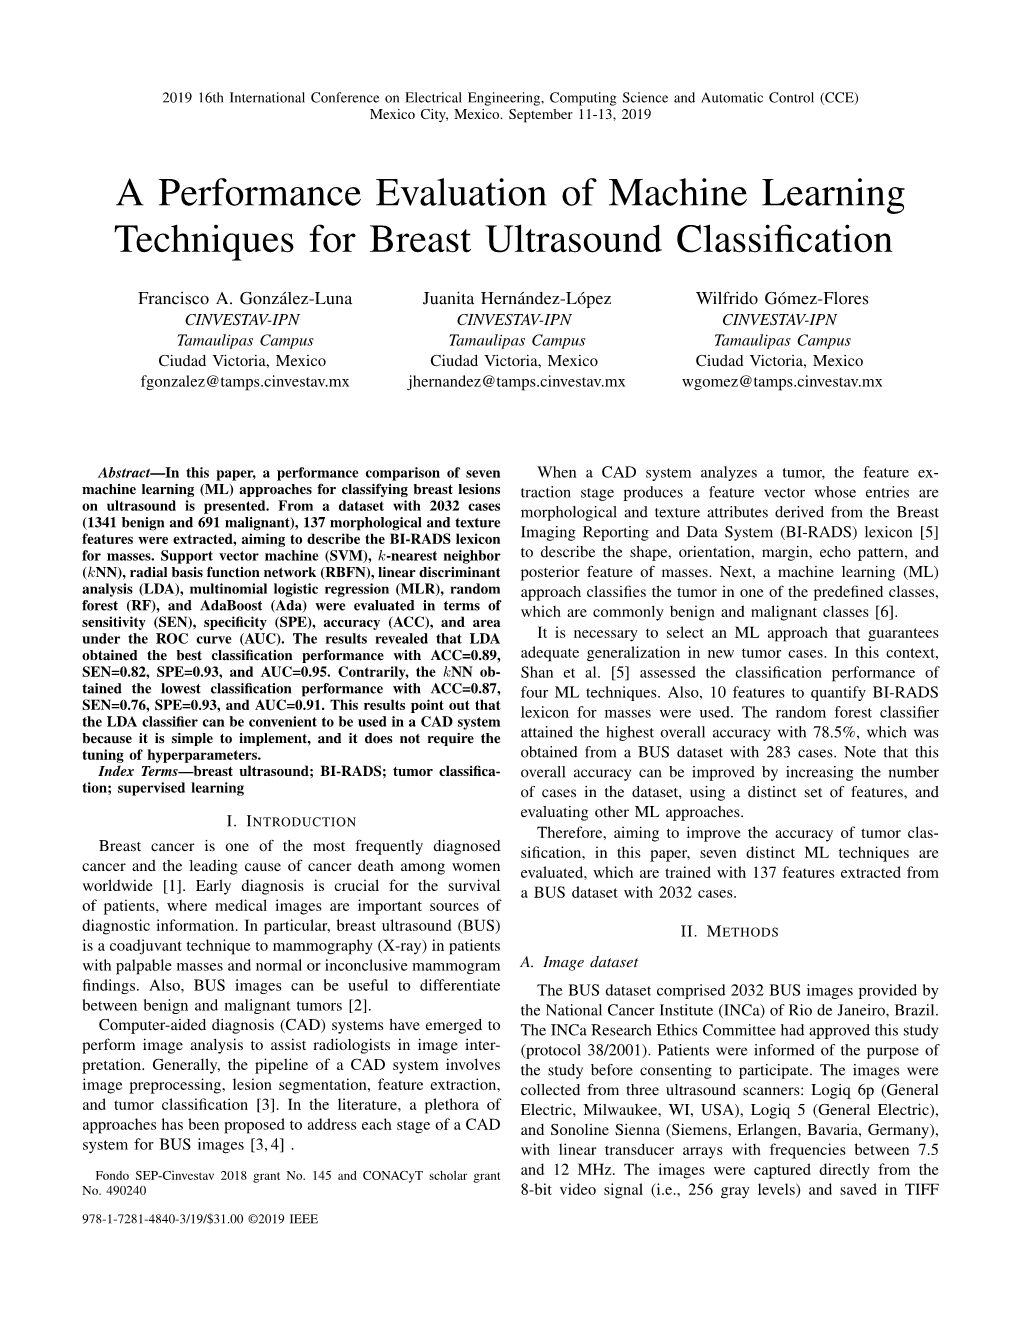 A Performance Evaluation of Machine Learning Techniques for Breast Ultrasound Classification